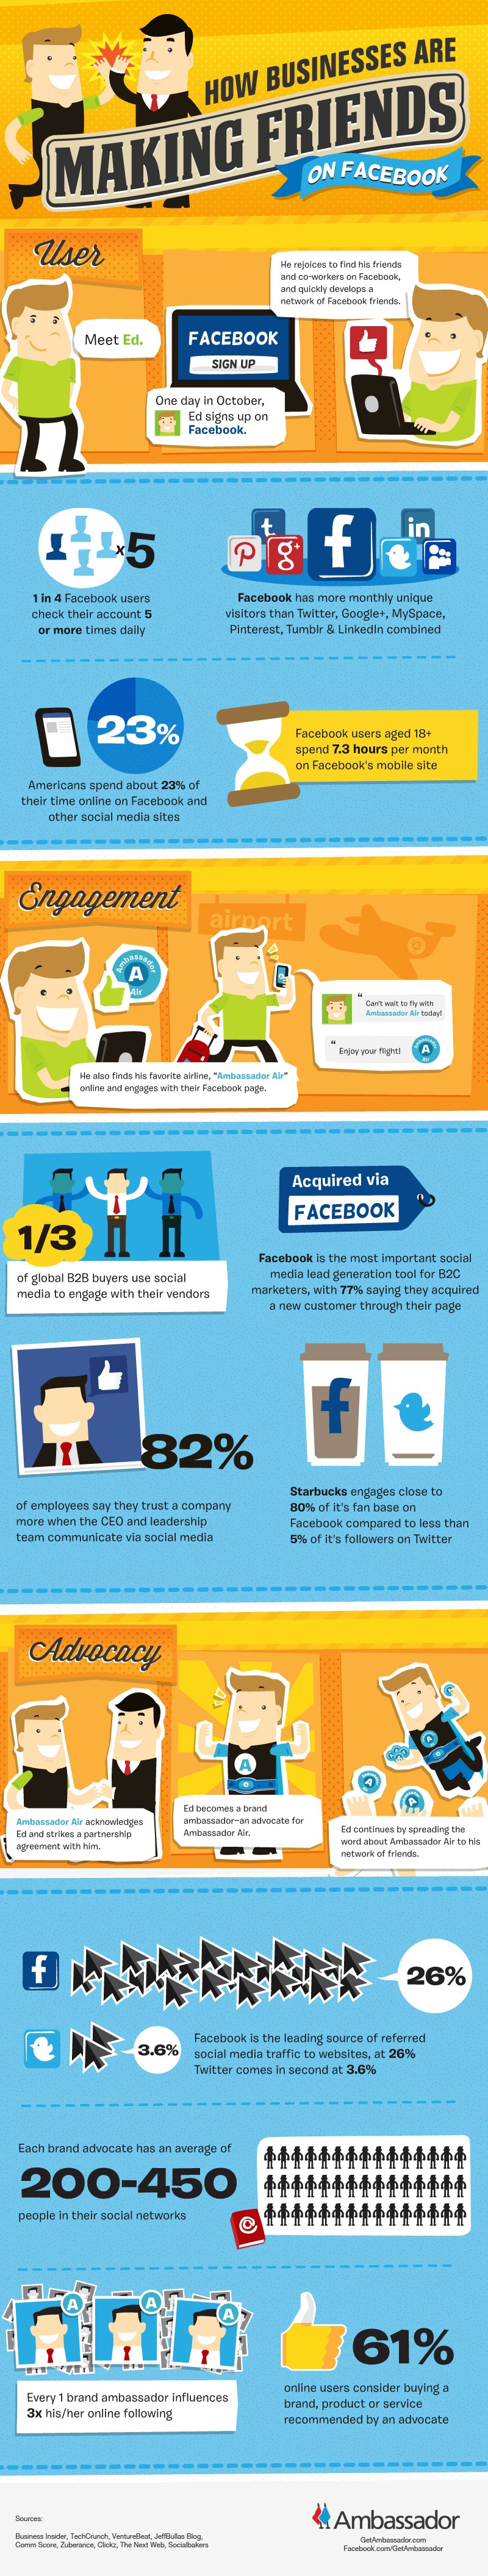 making-more-friends-facebook-infographic